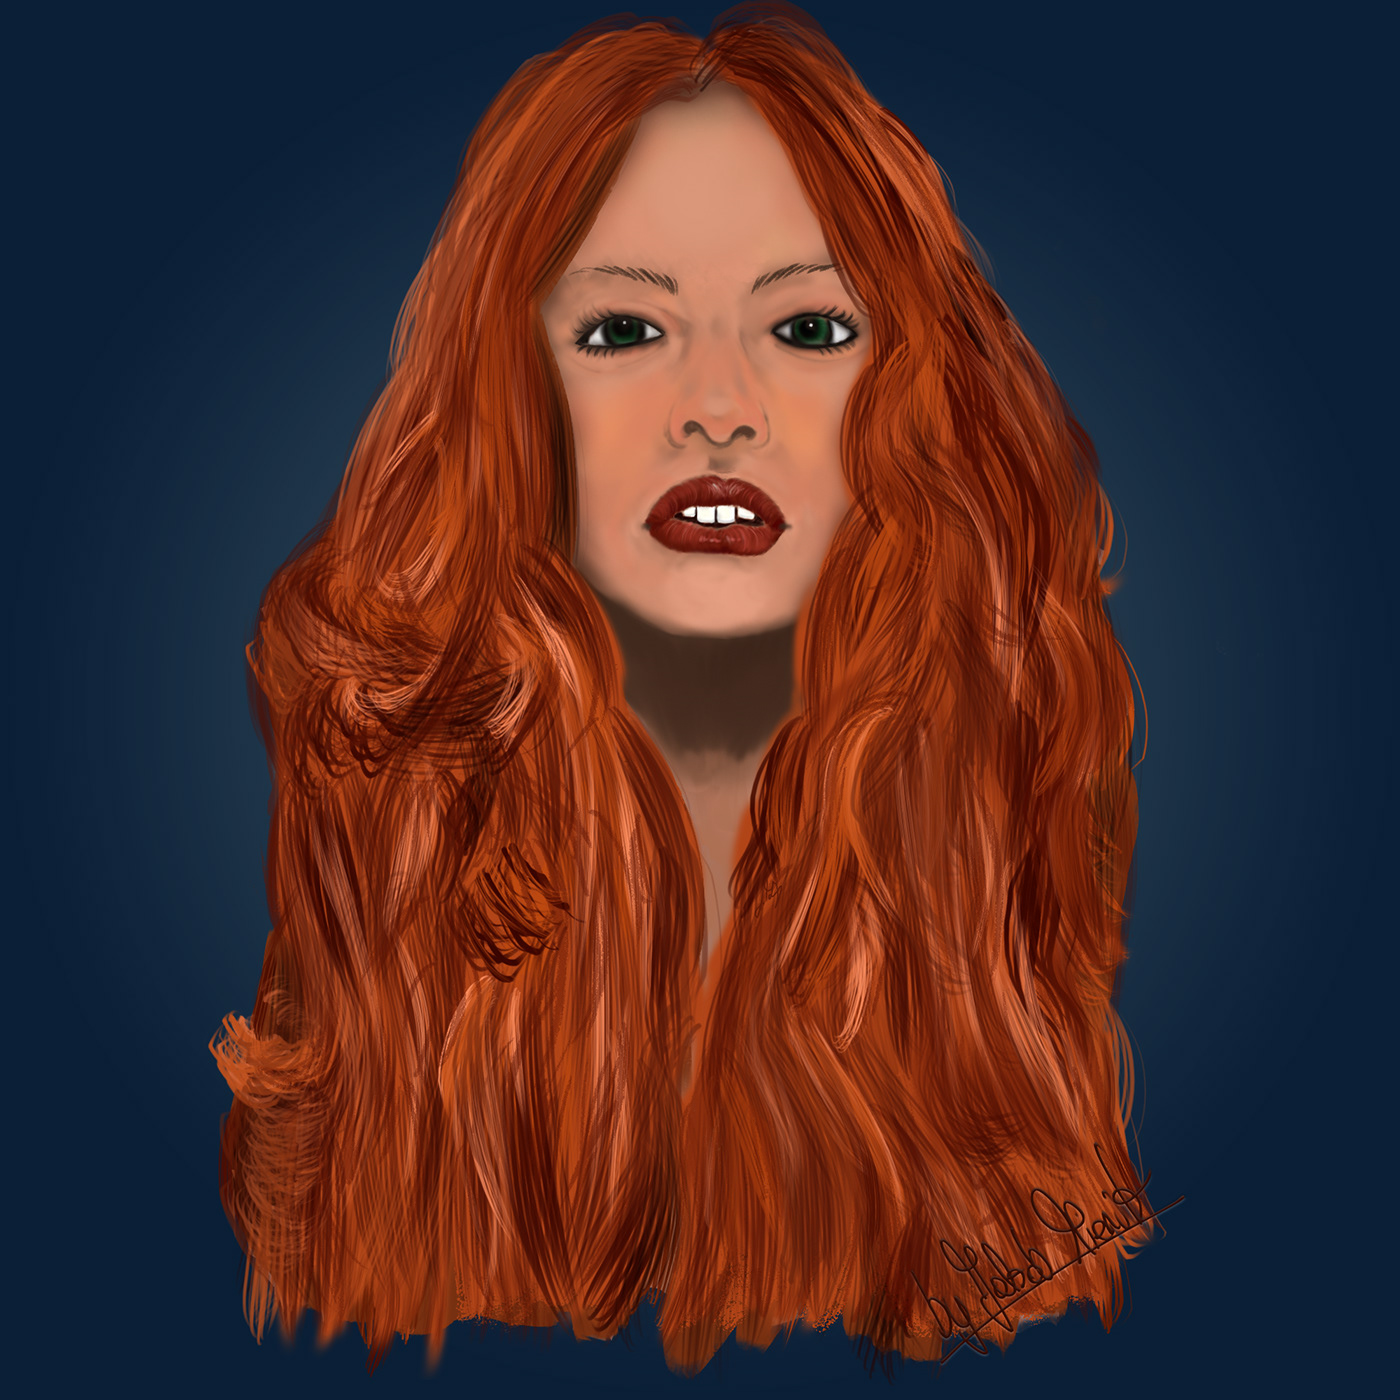 Red hair woman painting with photoshop